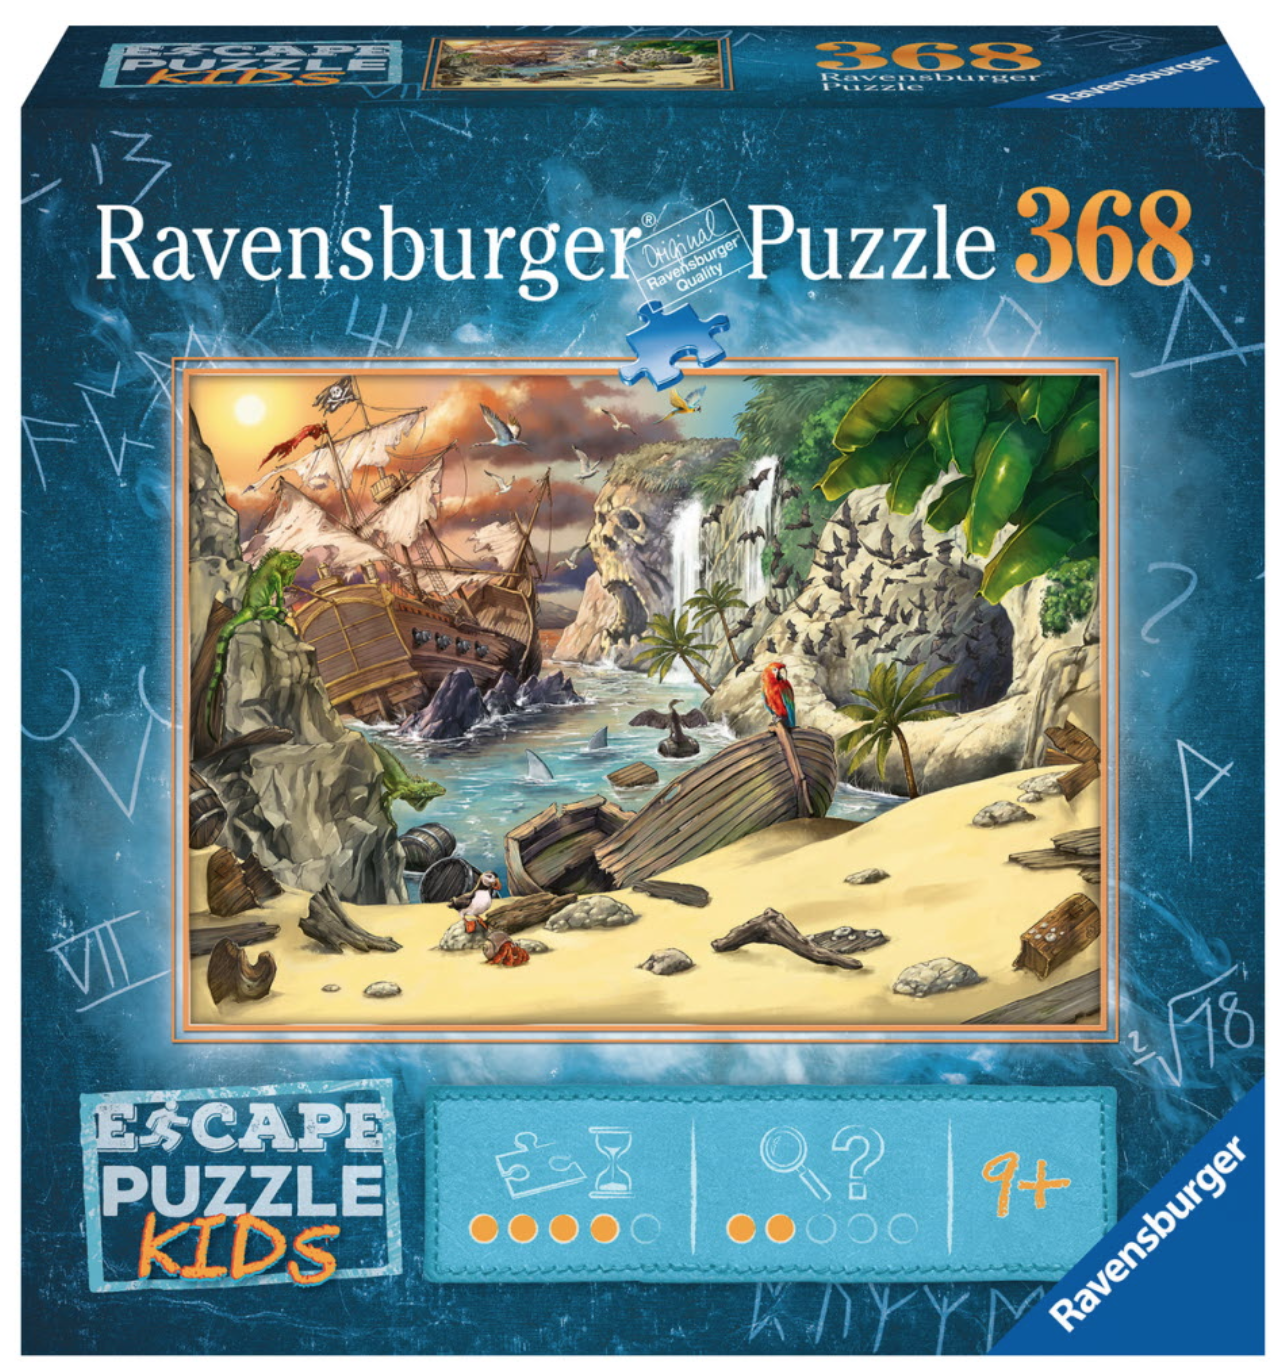 Buying cheap Ravensburger Puzzles? Wide choice!